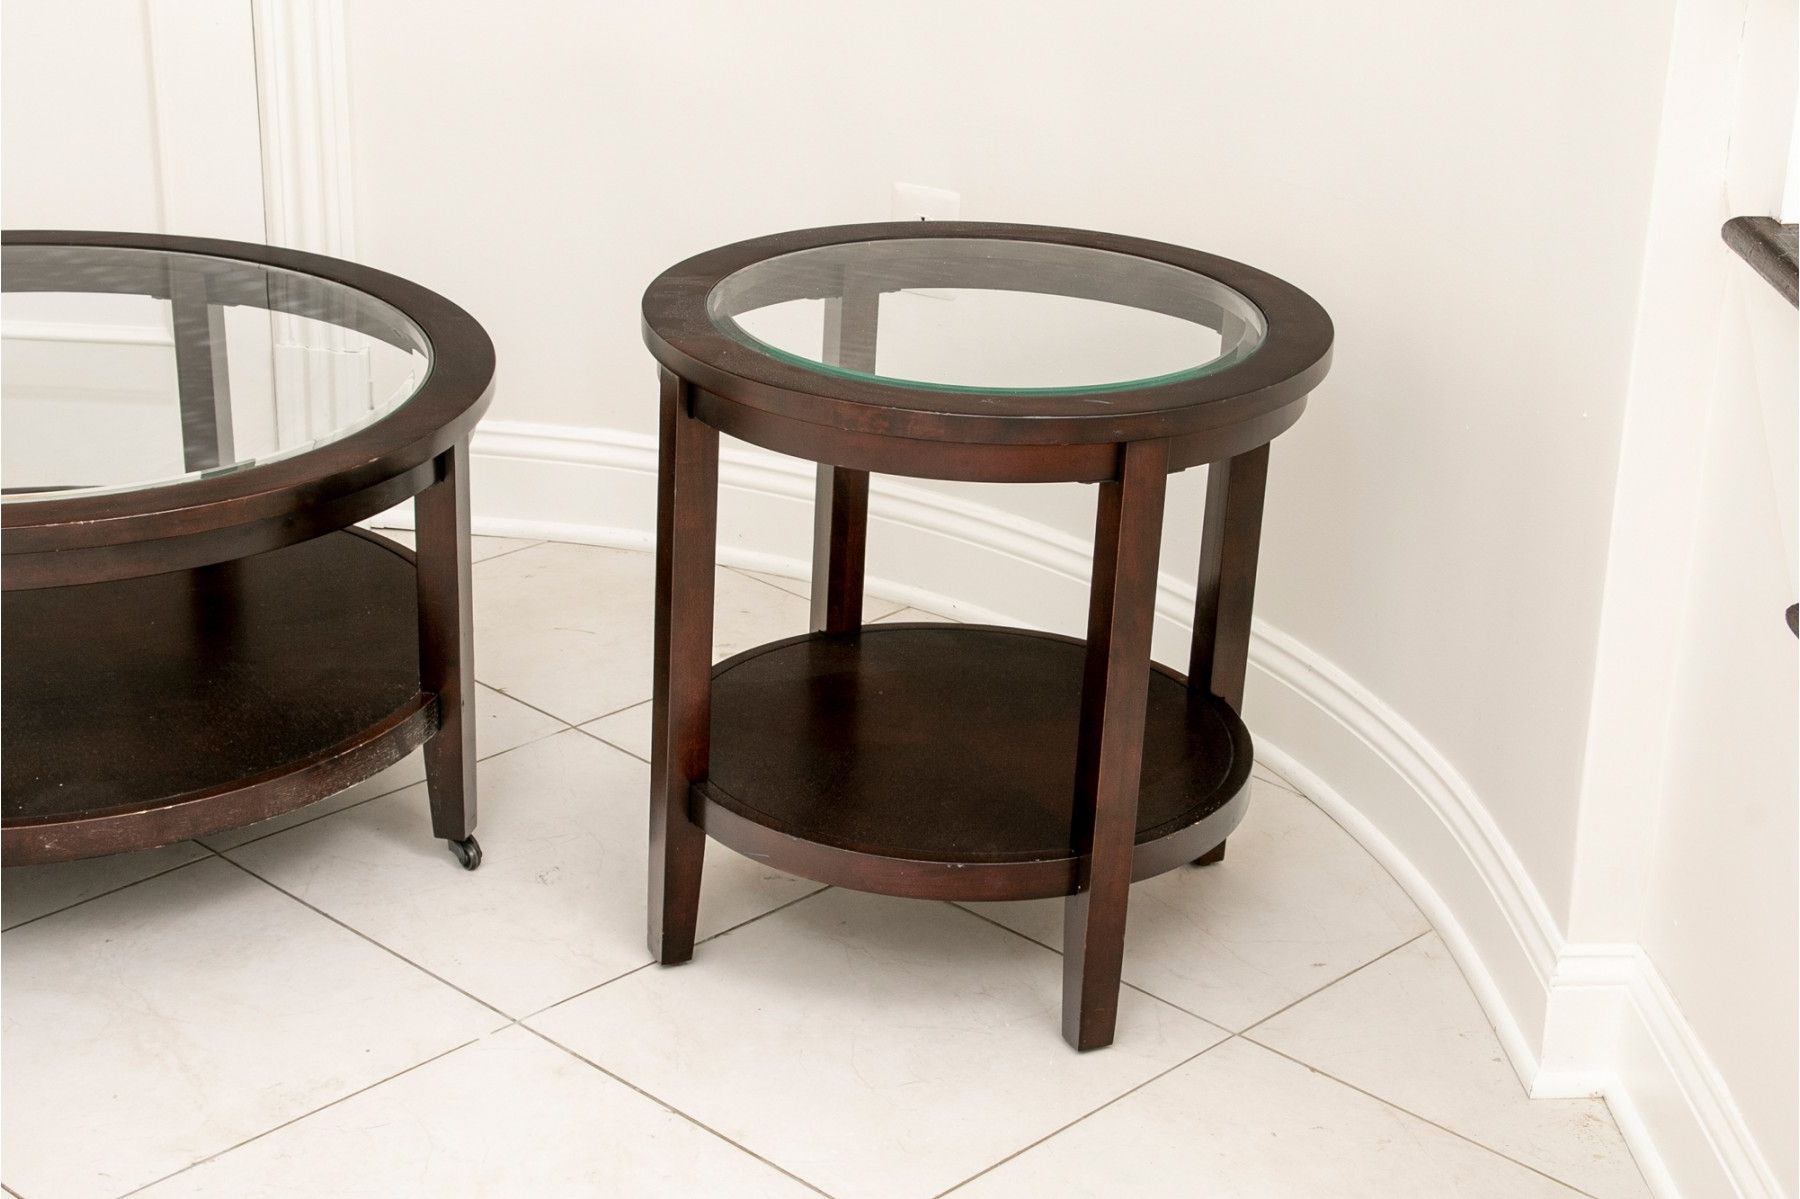 Current Decorative Quality Round Cocktail Table & Matching Side Table #141505 Pertaining To Caviar Black Cocktail Tables (View 3 of 10)